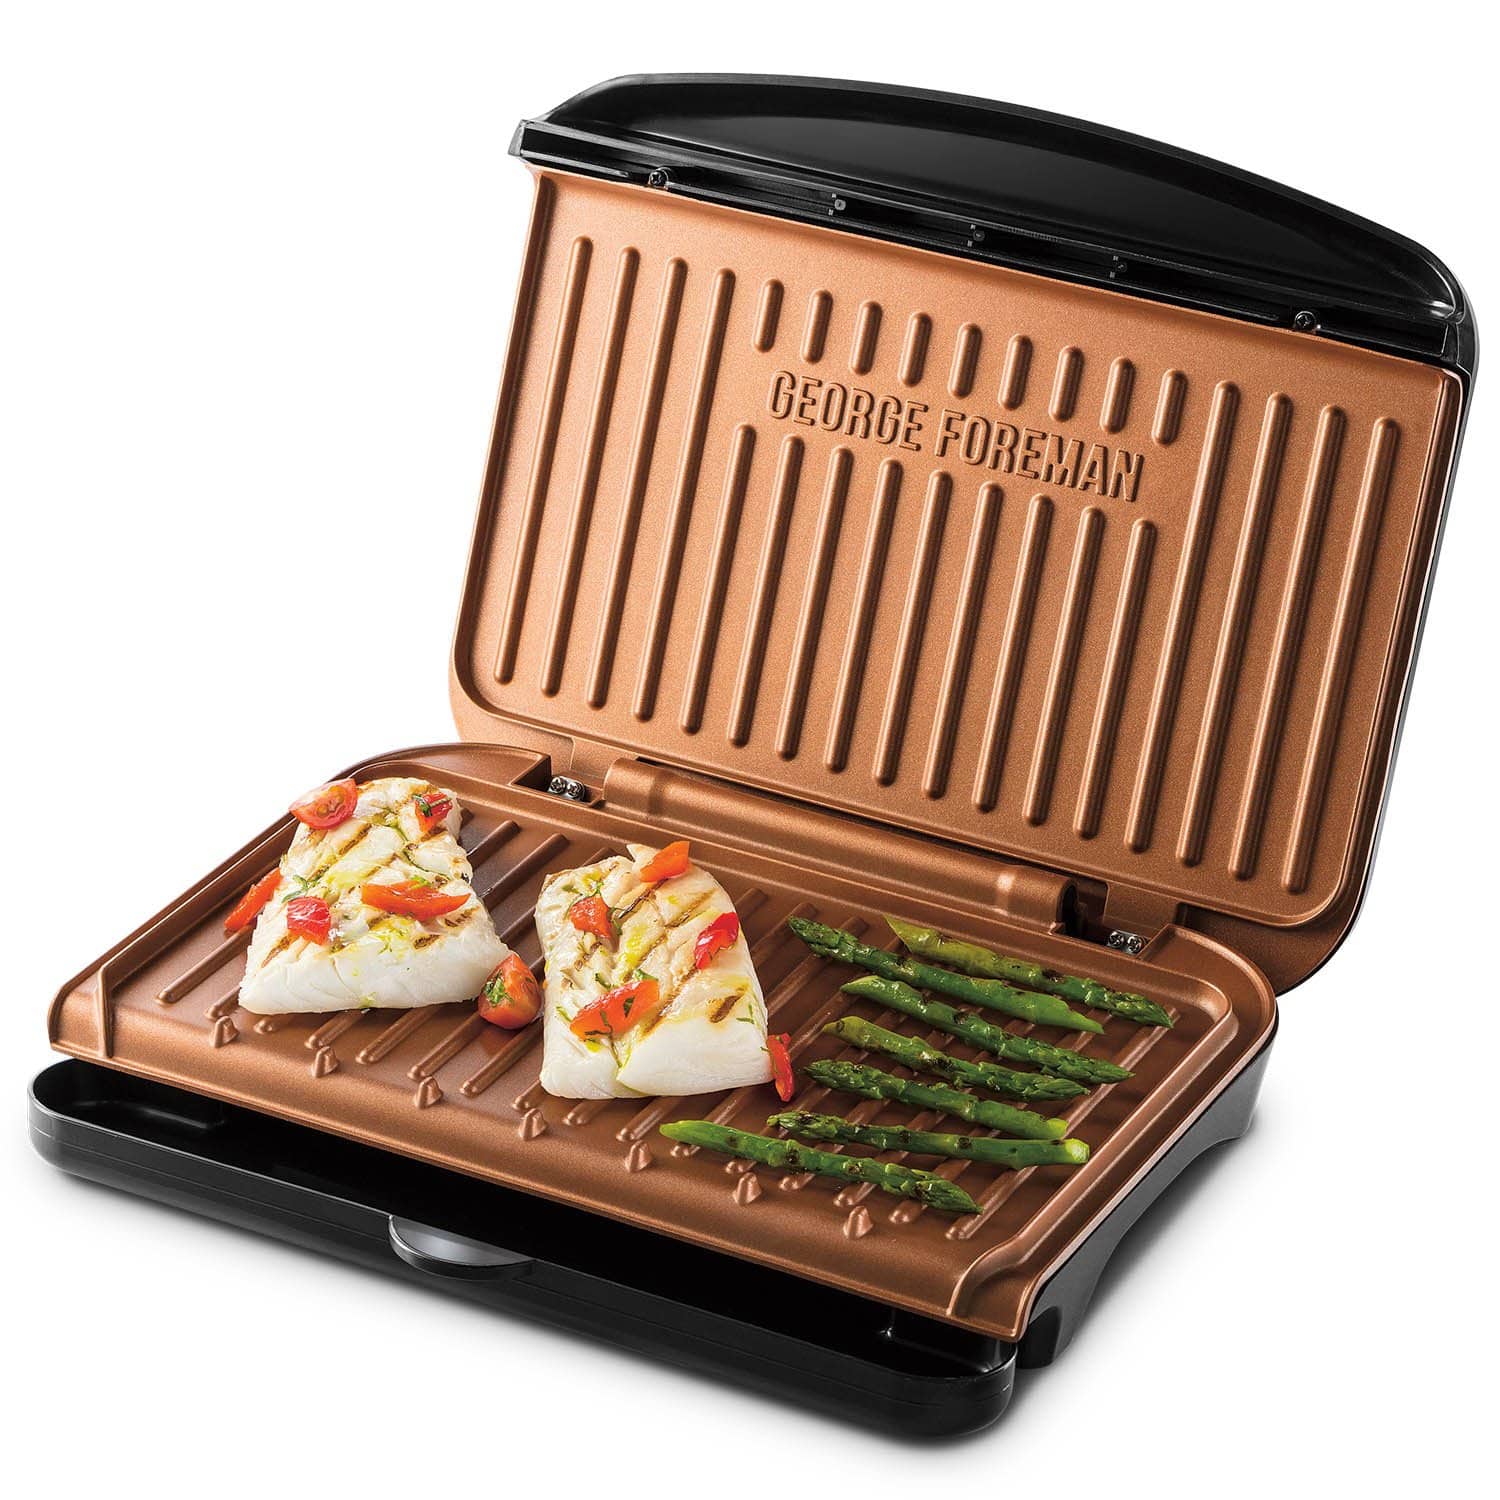 GEORGE FOREMAN FIT GRILL COPPER PLATES - 25811